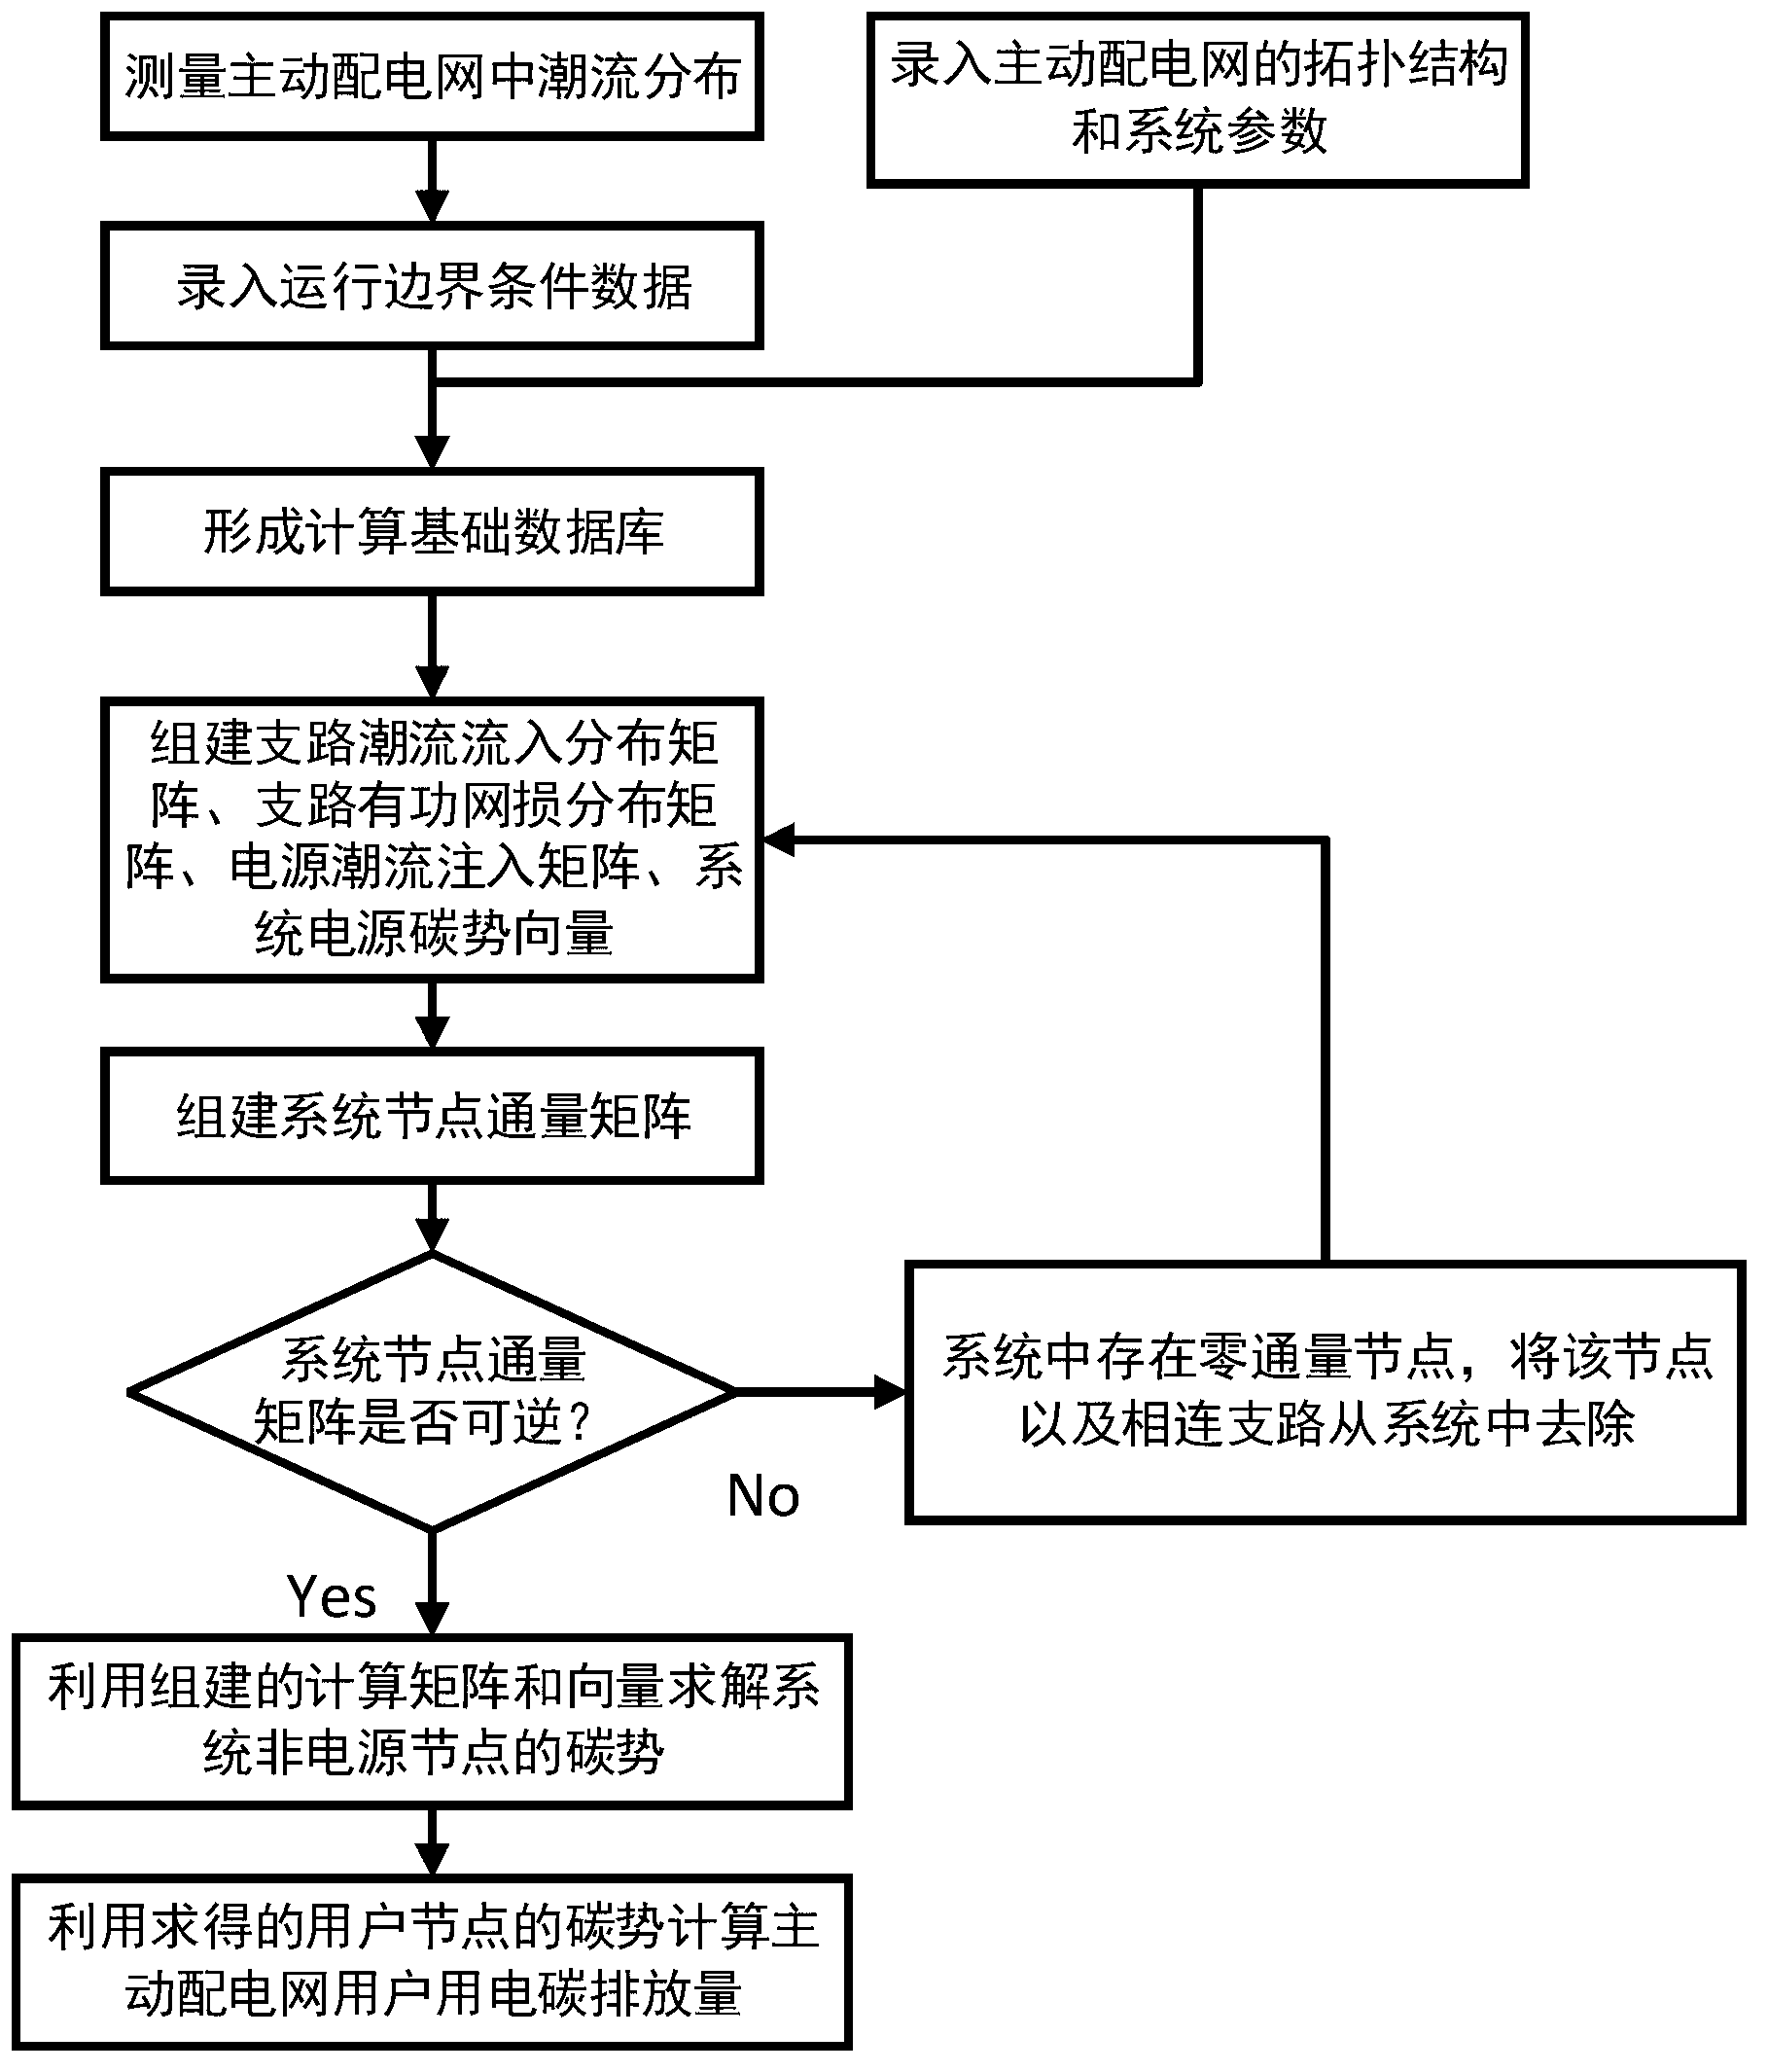 Method for measuring carbon emission quantities during power consumption by active power distribution network users and based on carbon emission flow